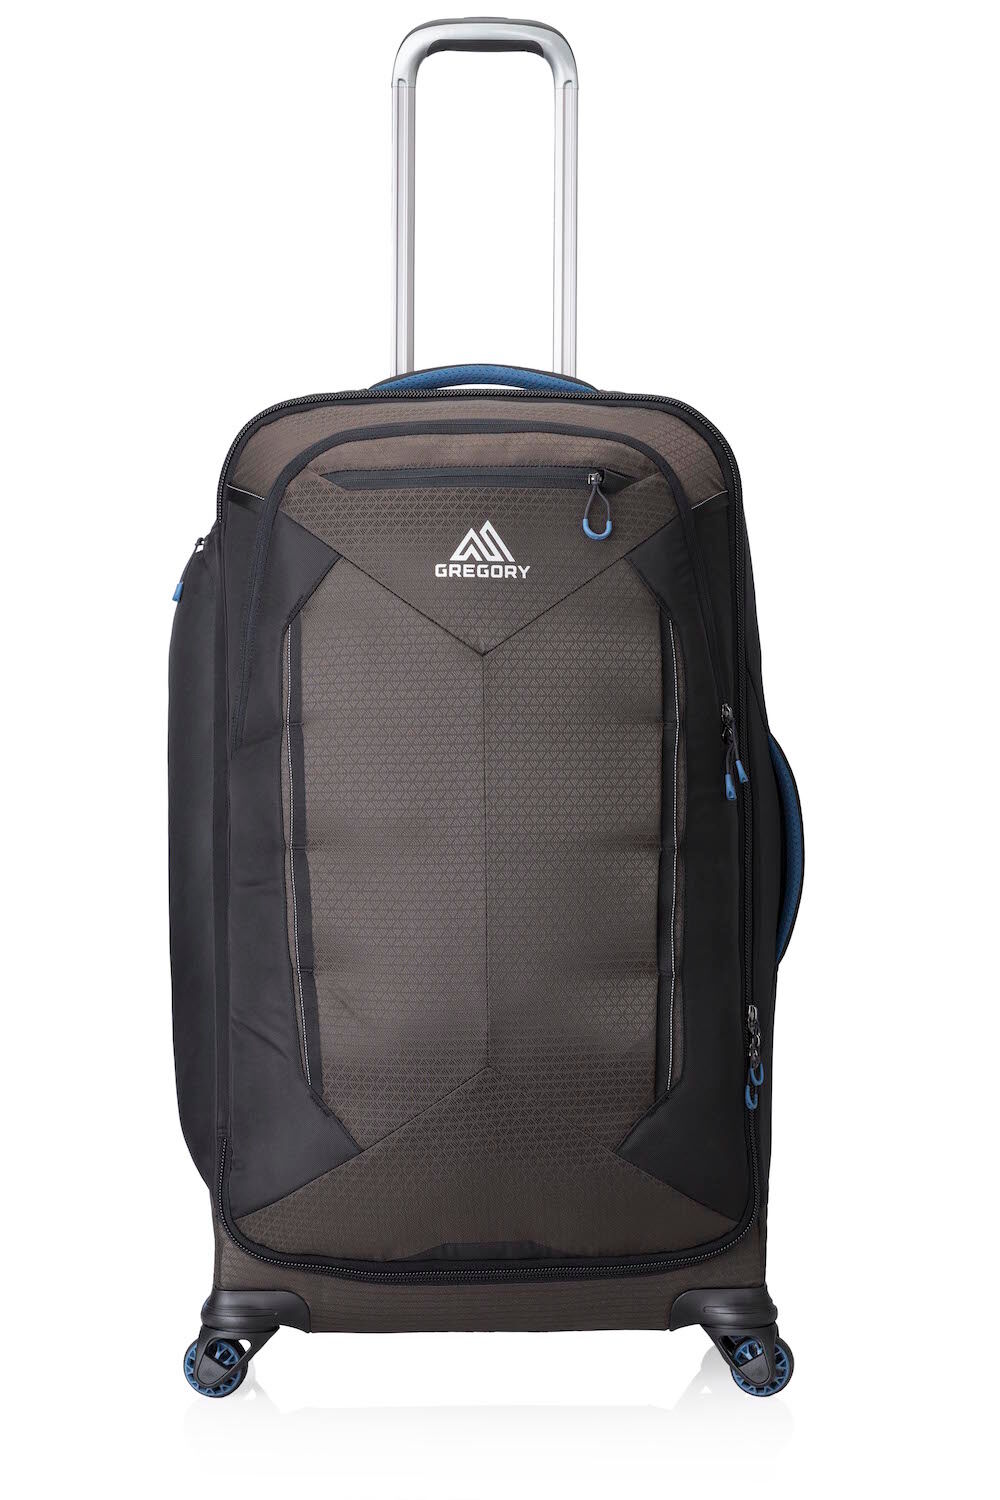 Gregory Quadro Roller 30 - Luggage